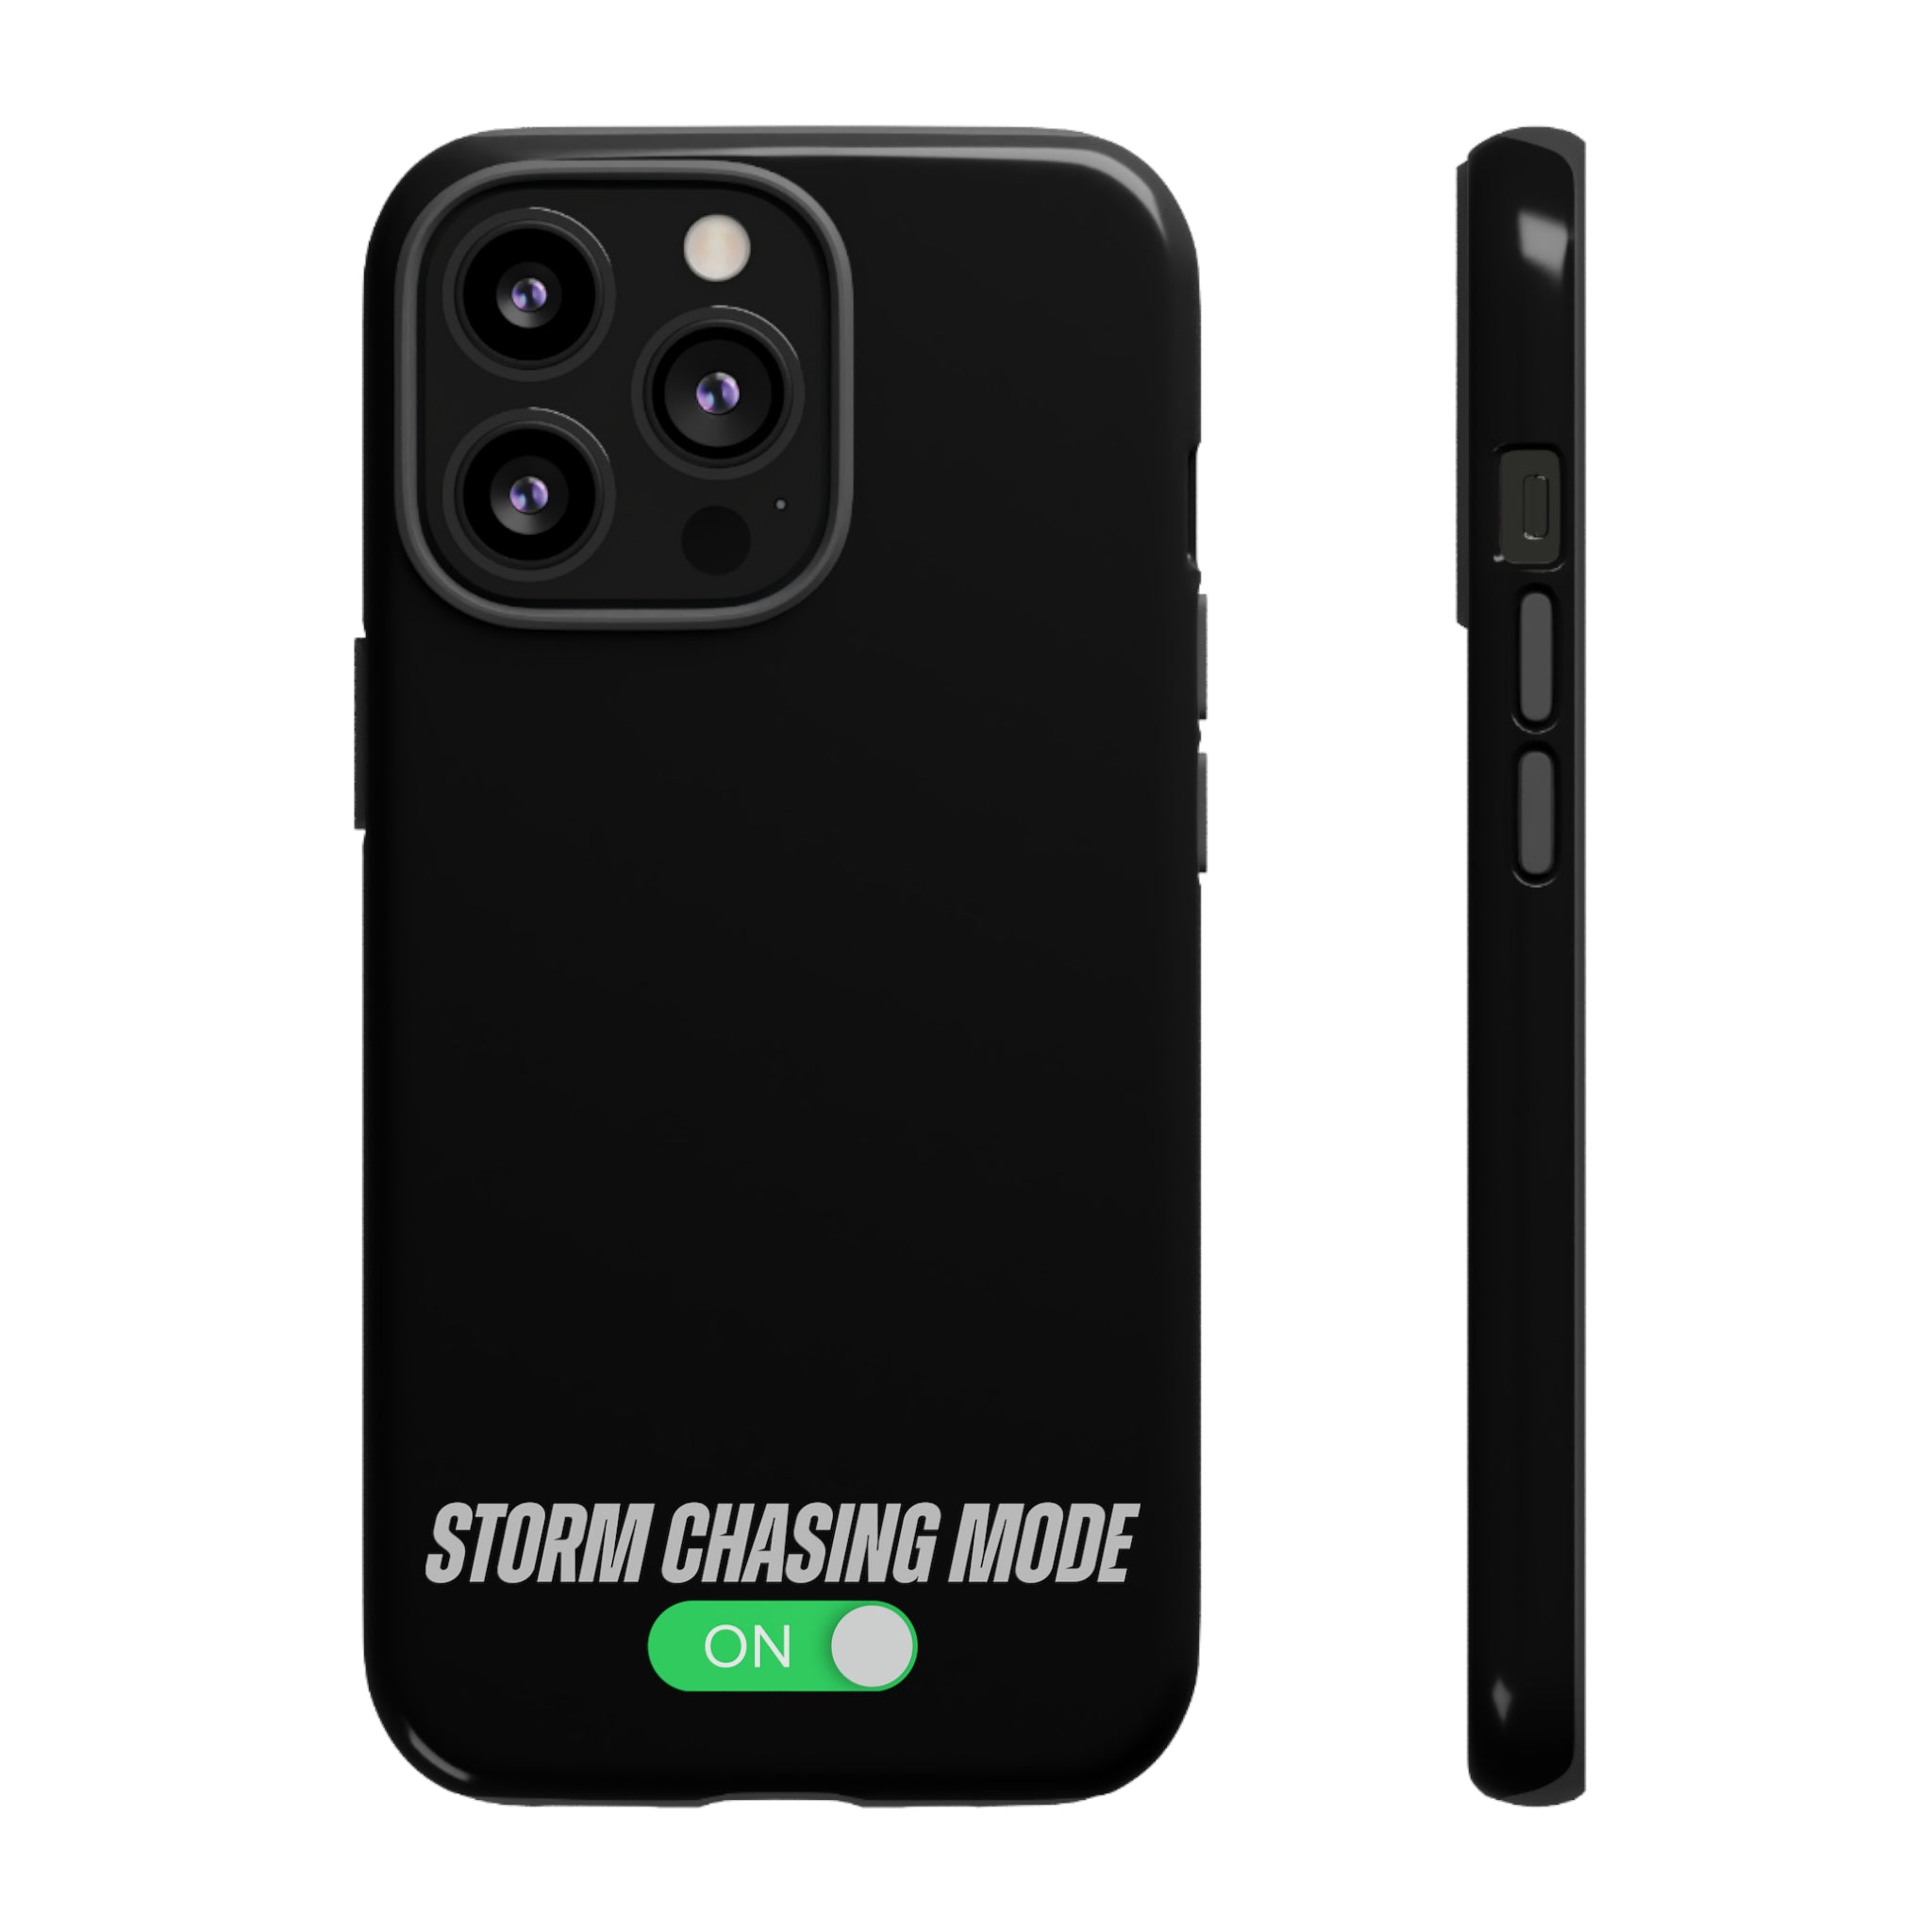 Storm Chasing Mode: ON Tough Phone Case 